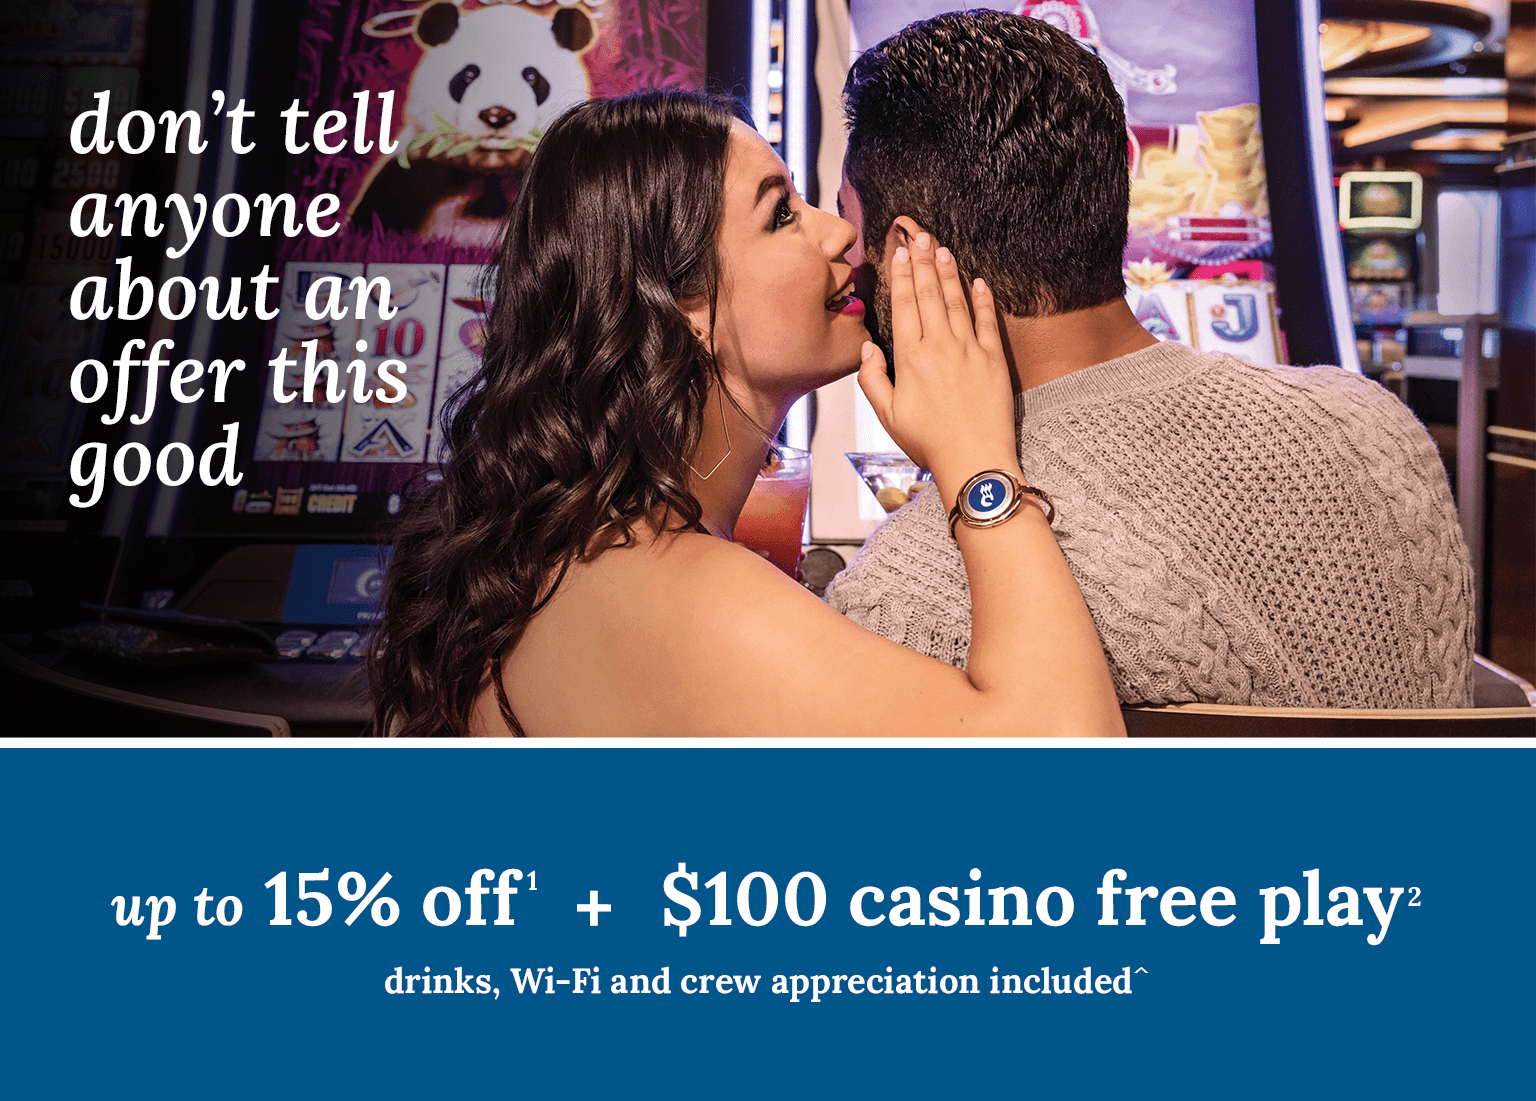 up to 15% off + $100 casino free play + drinks, Wi-Fi and crew appreciation included. Click here to book.